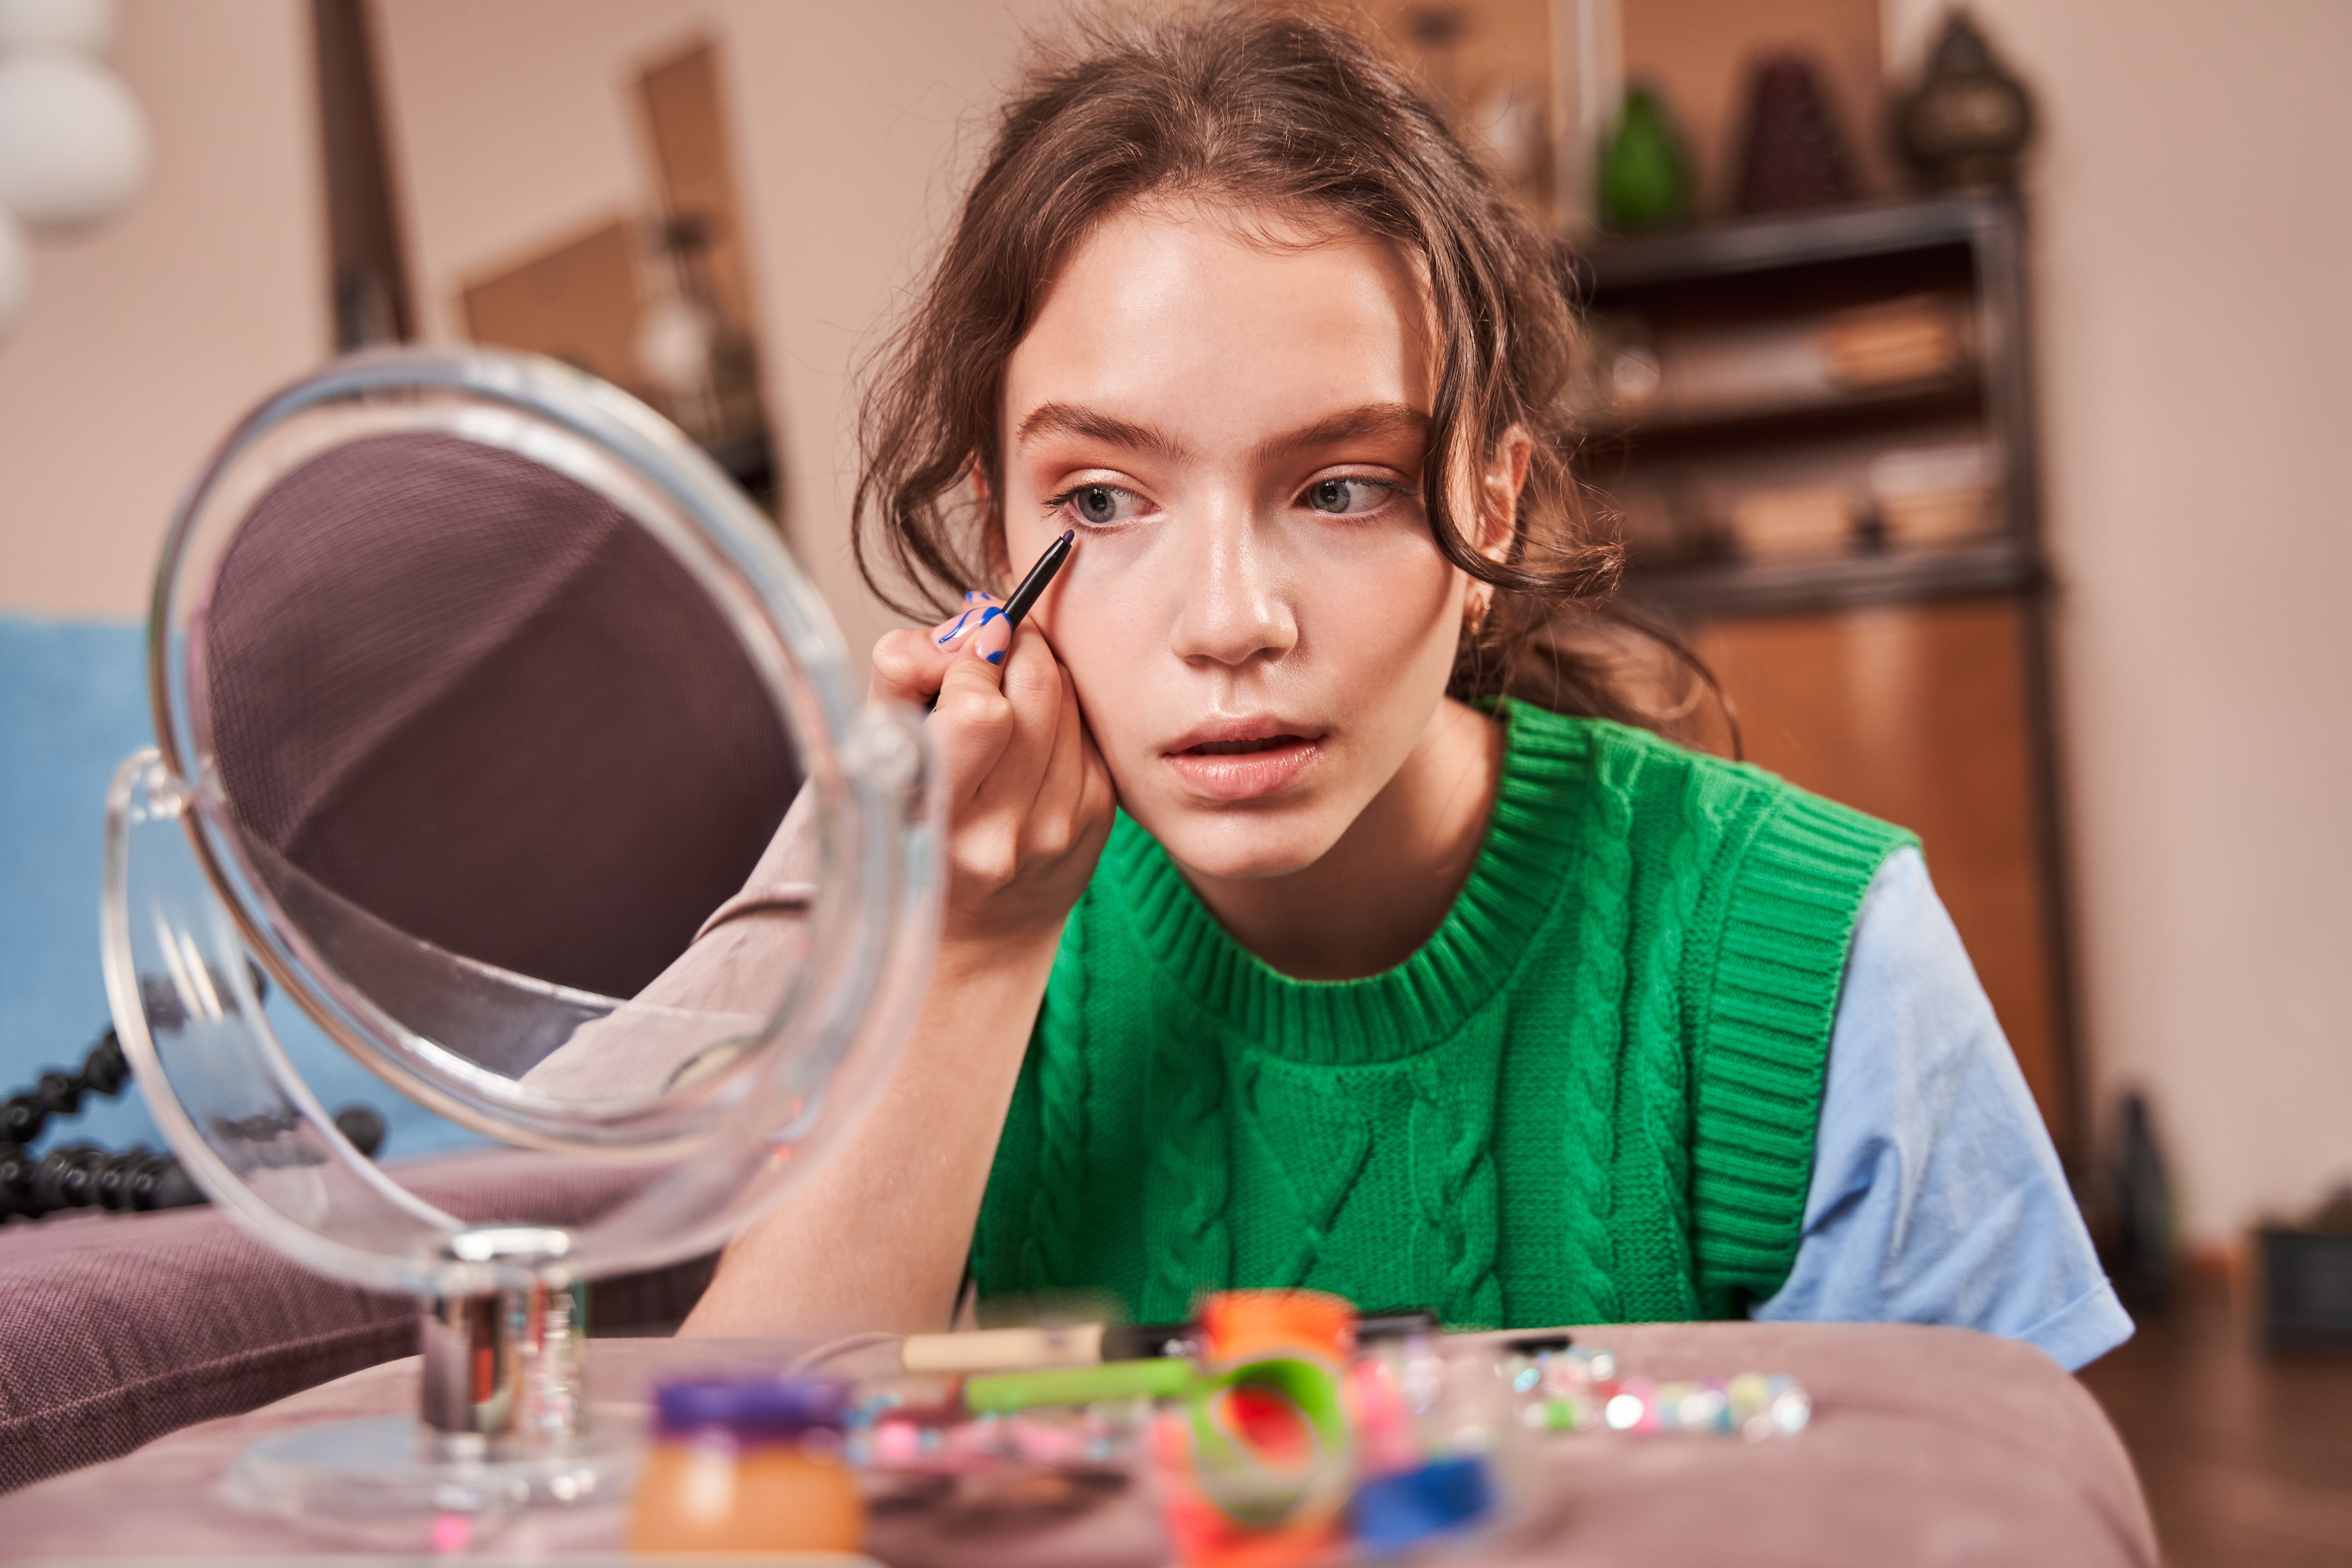 A teenage girl applies makeup while looking in the mirror | Source: Shutterstock